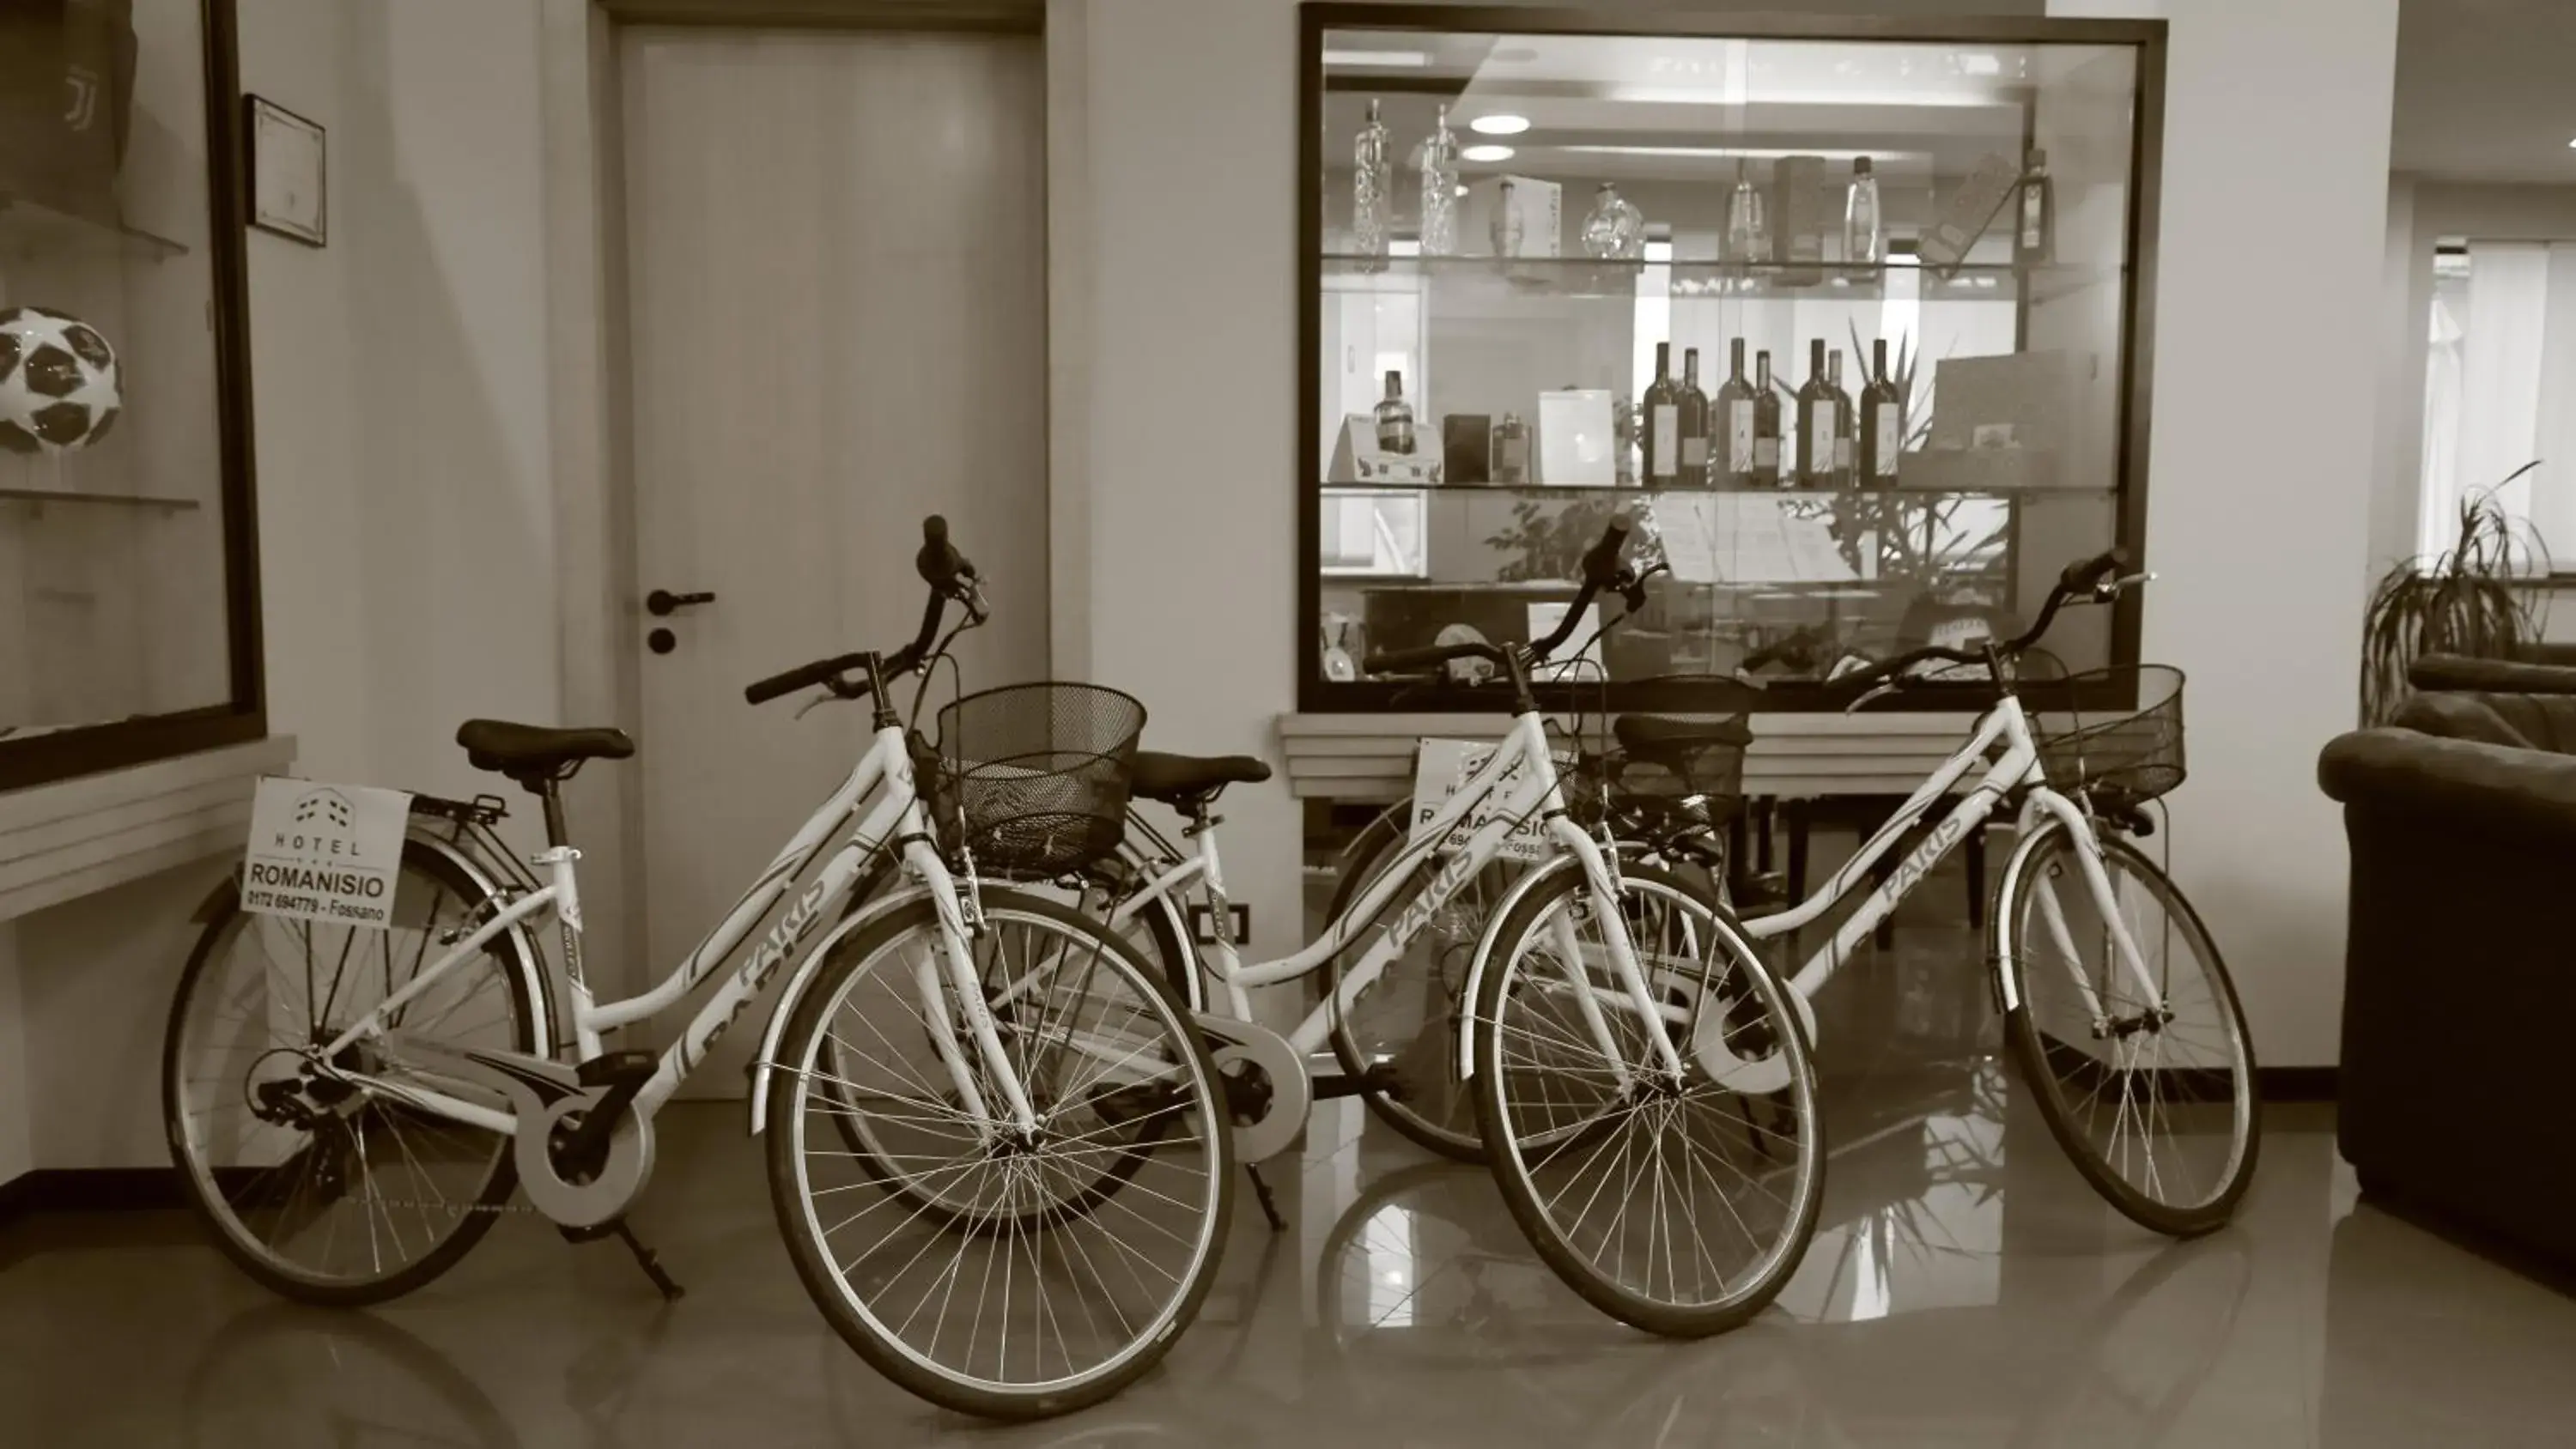 Cycling, Other Activities in Hotel Romanisio